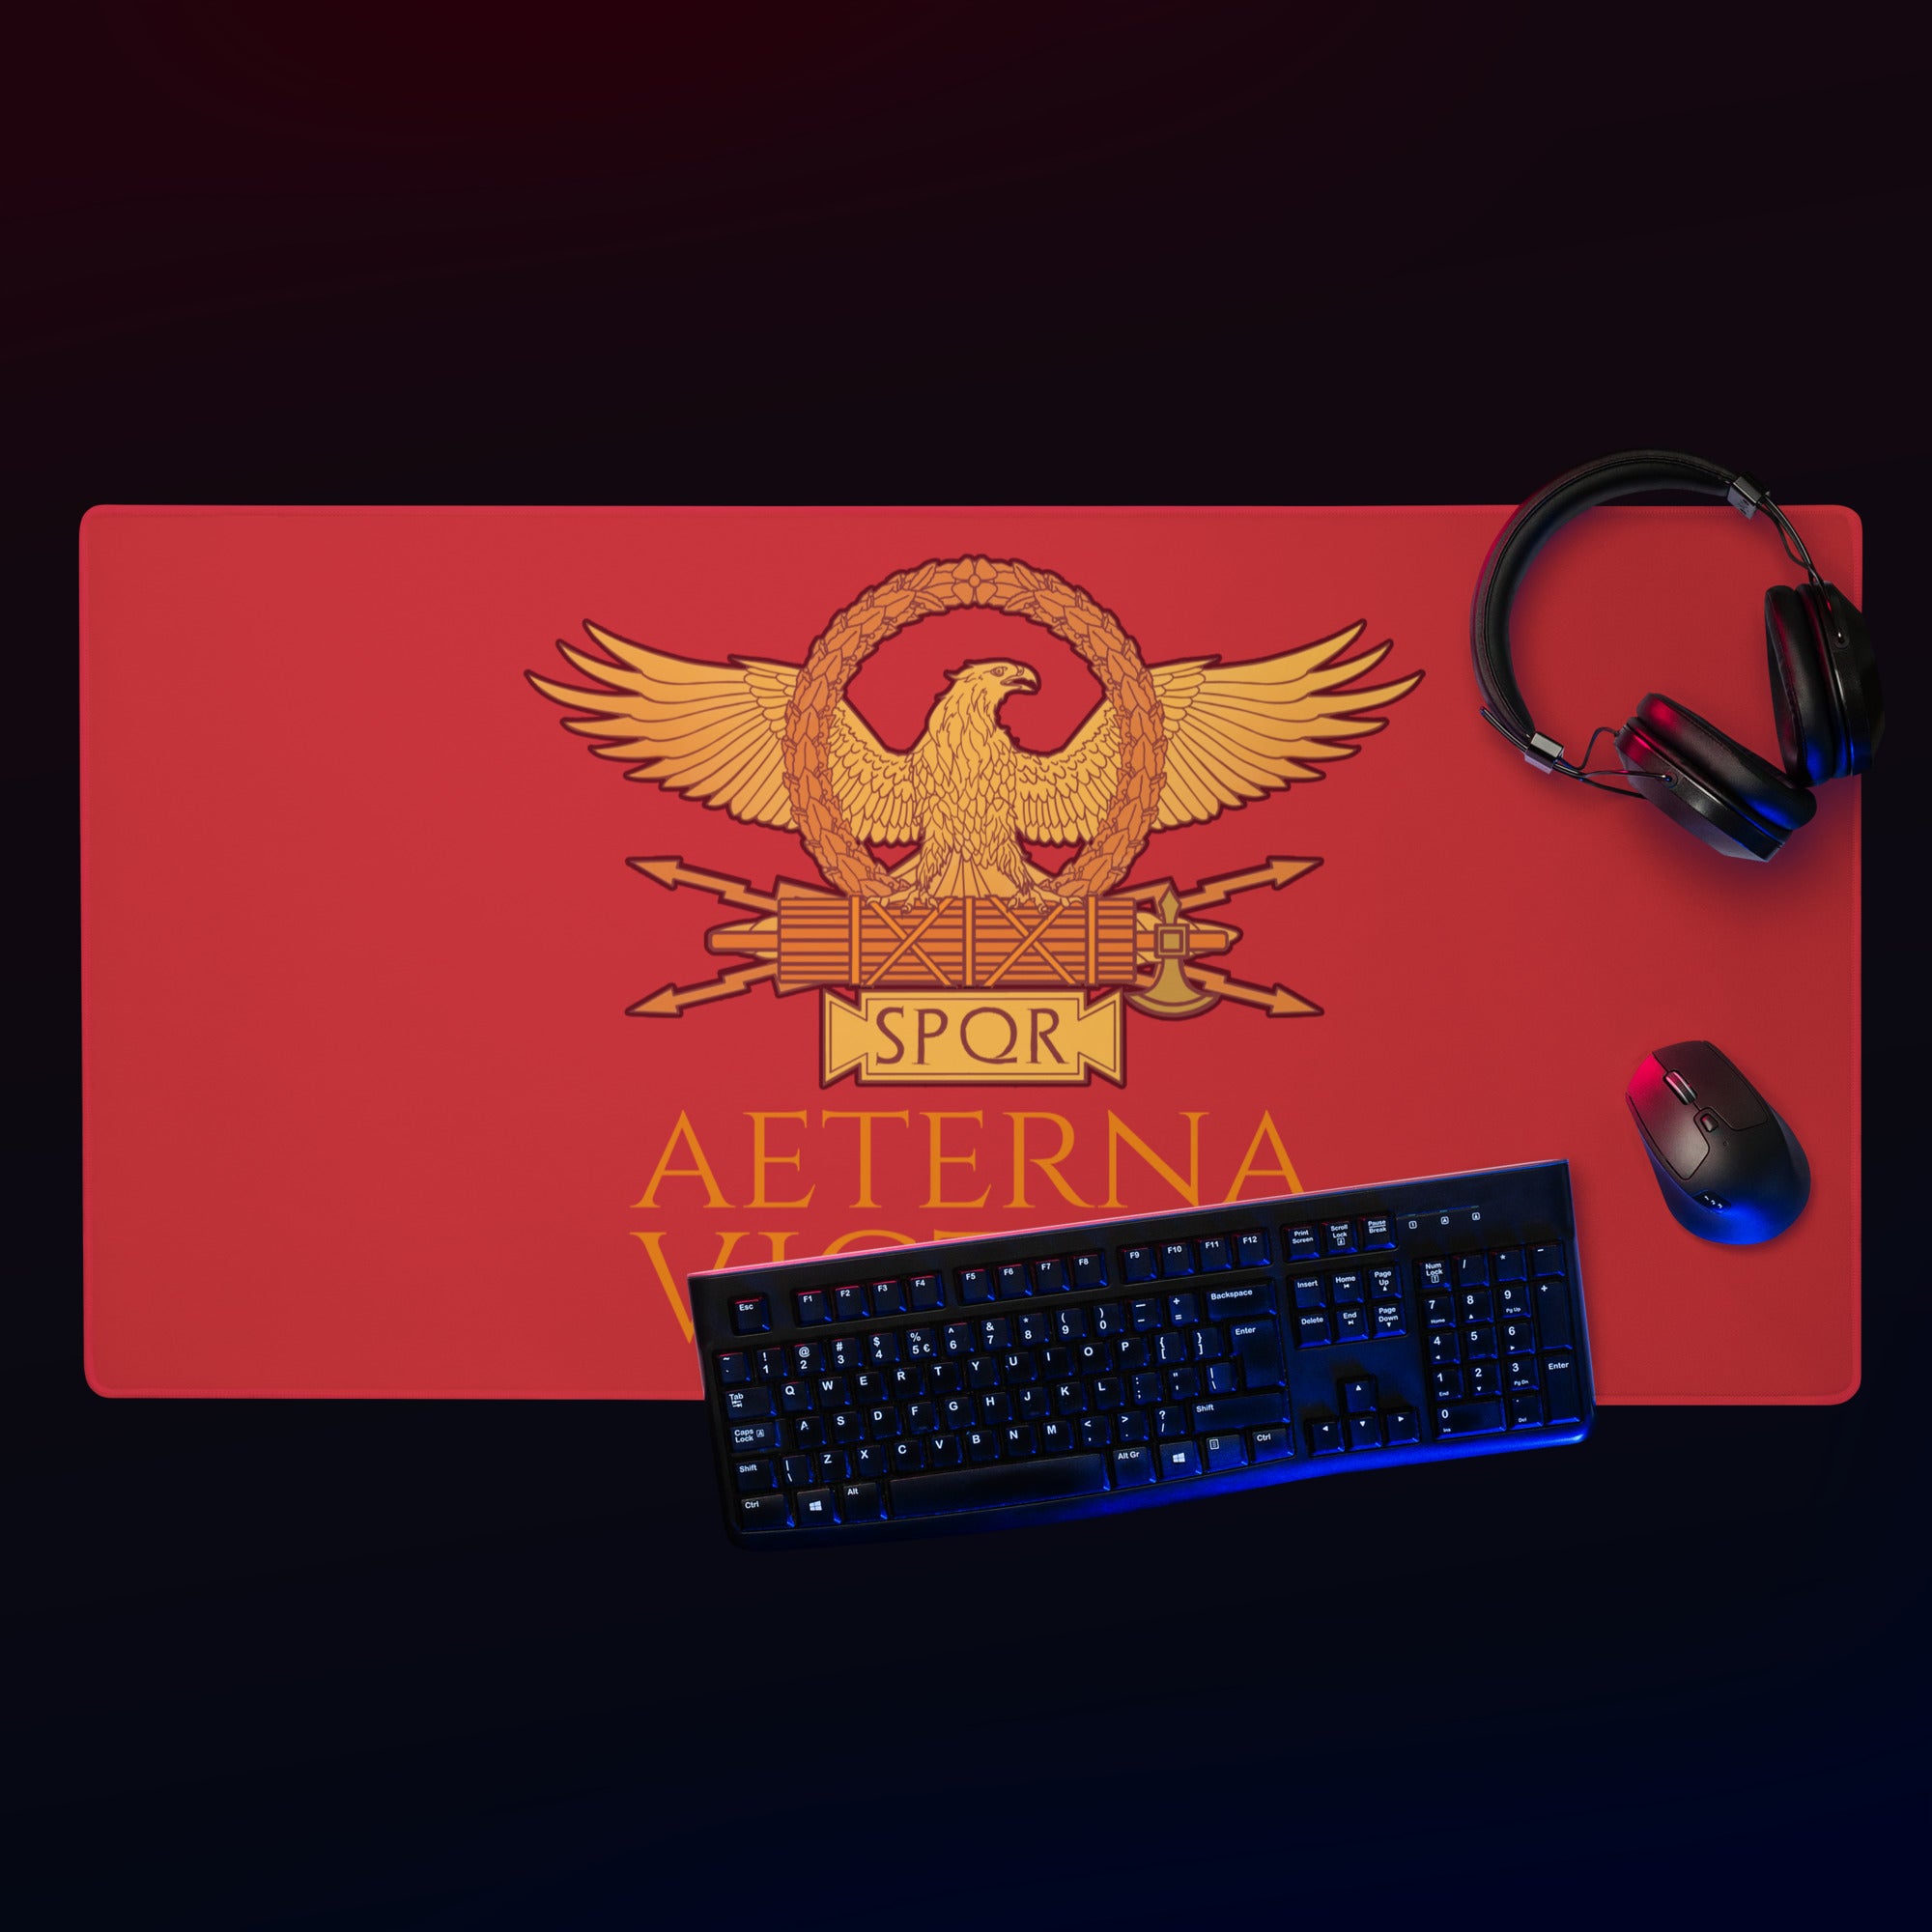 Aeterna Victrix - Eternal Victory - Legionary Motto - Ancient Rome Gaming Mouse Pad